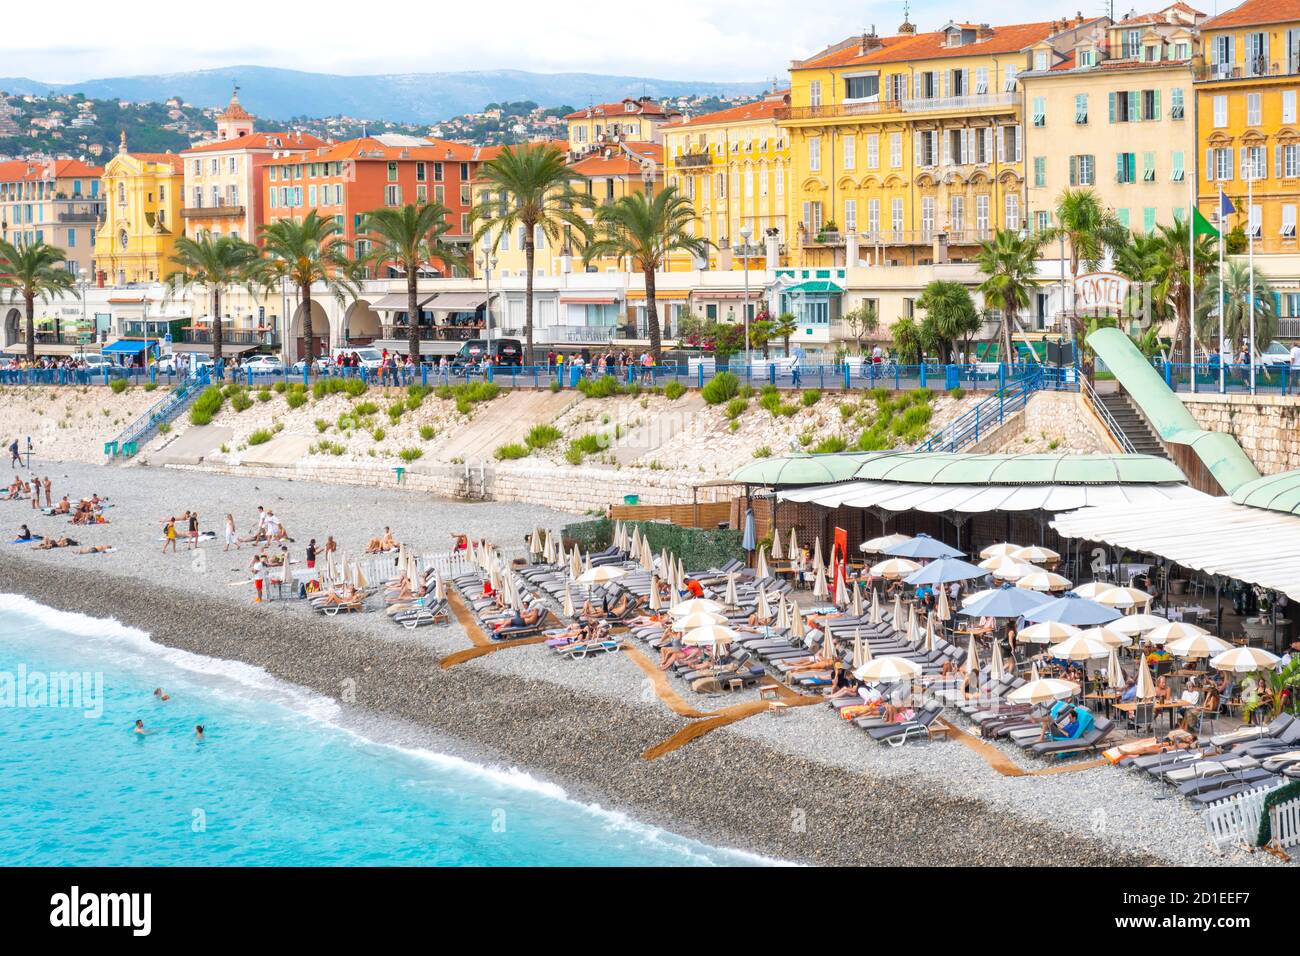 Tourists enjoy the Castel Plage private beach club and restaurant on the shores of the Bay of Angels on the Riviera in Nice, France Stock Photo